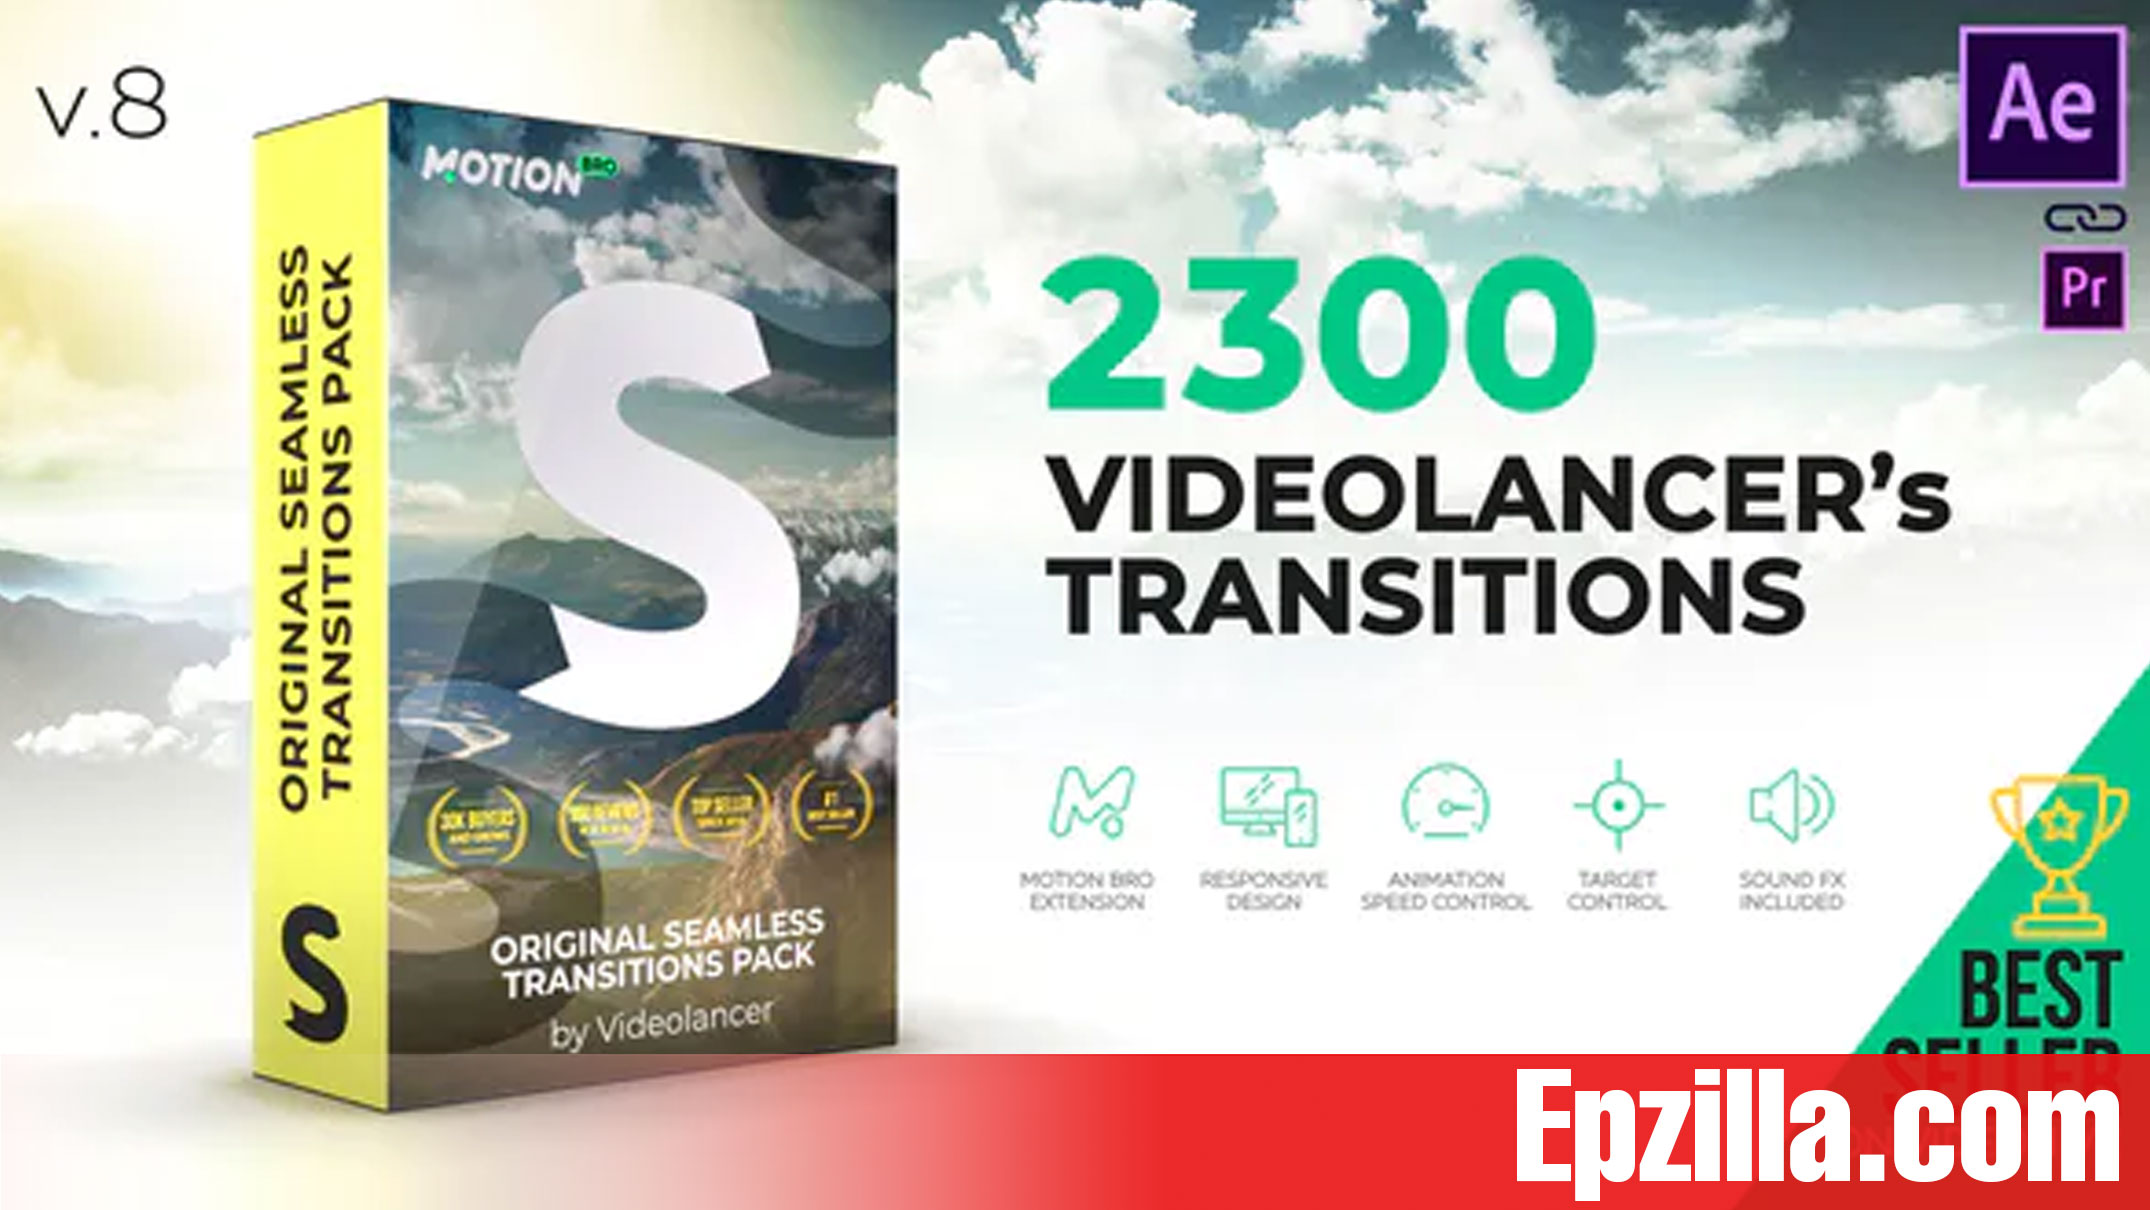 Videohive - Videolancer’s Transitions | Original Seamless Transitions Pack V8 18967340 Free Download